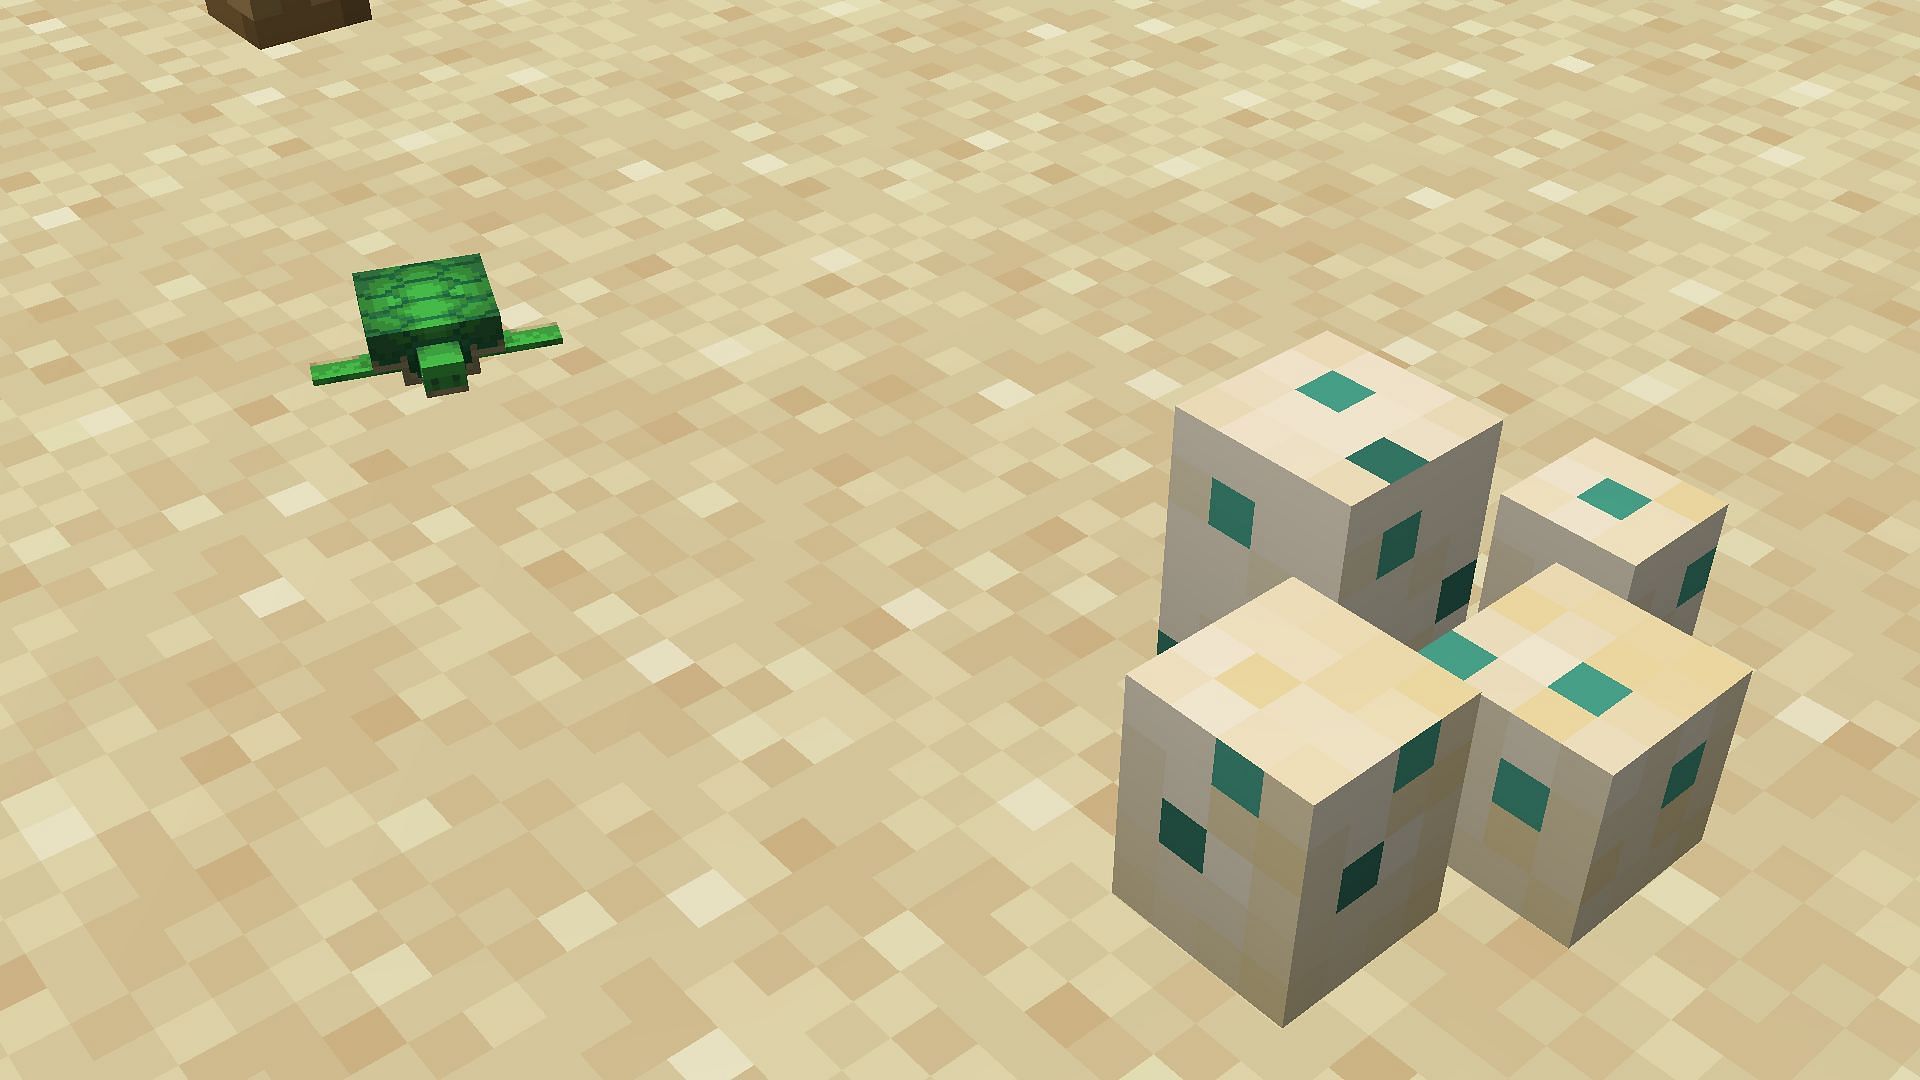 Baby Turtles are the smallest mob in Minecraft (Image via Mojang)